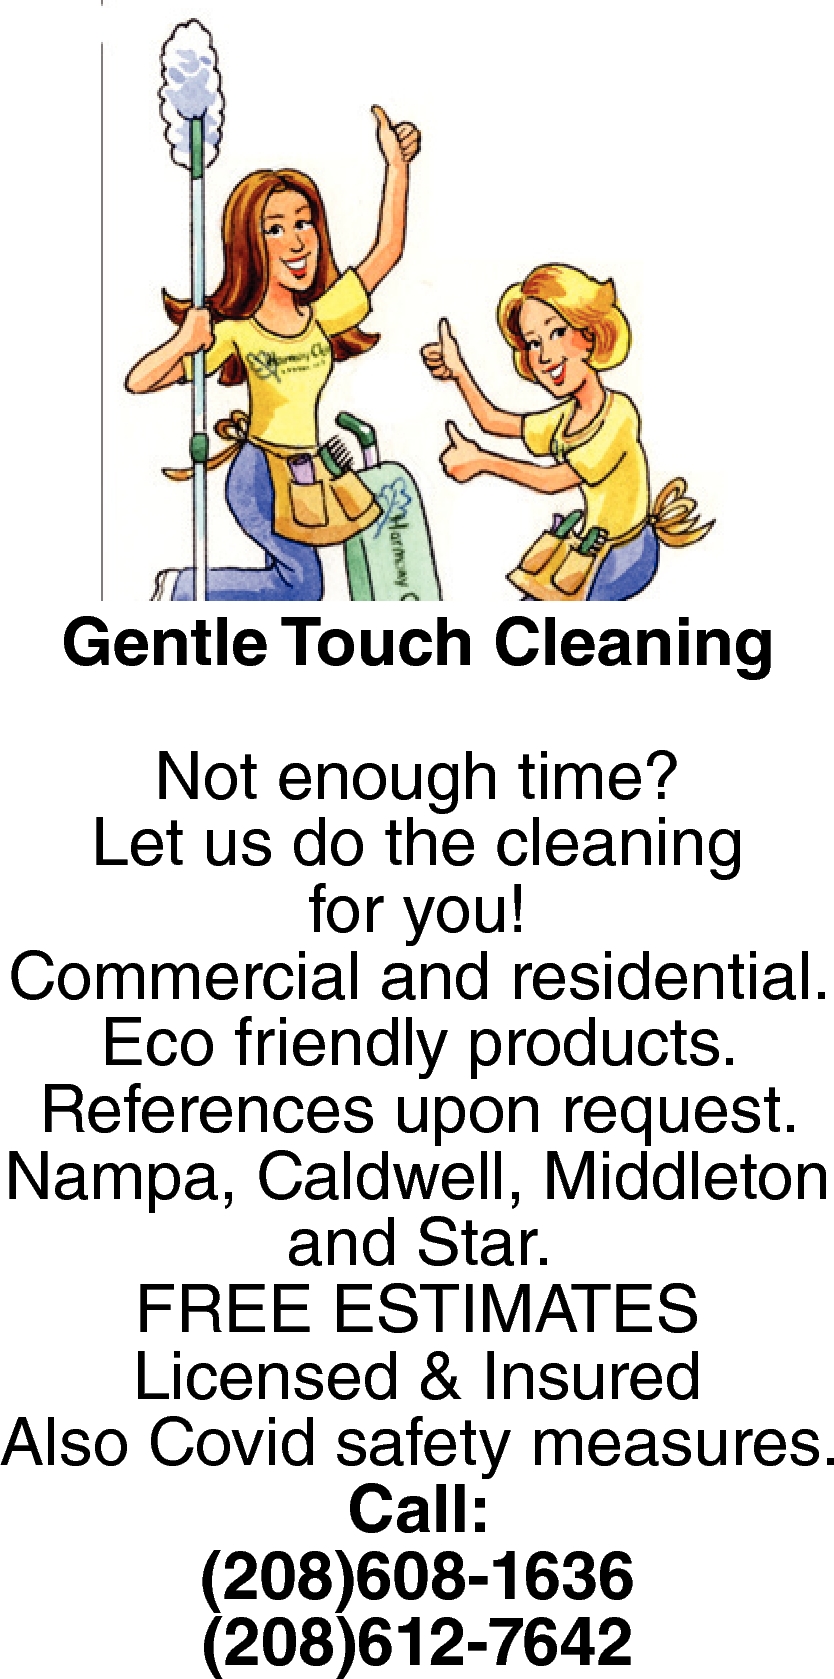 Let Us Do the Cleaning for You!